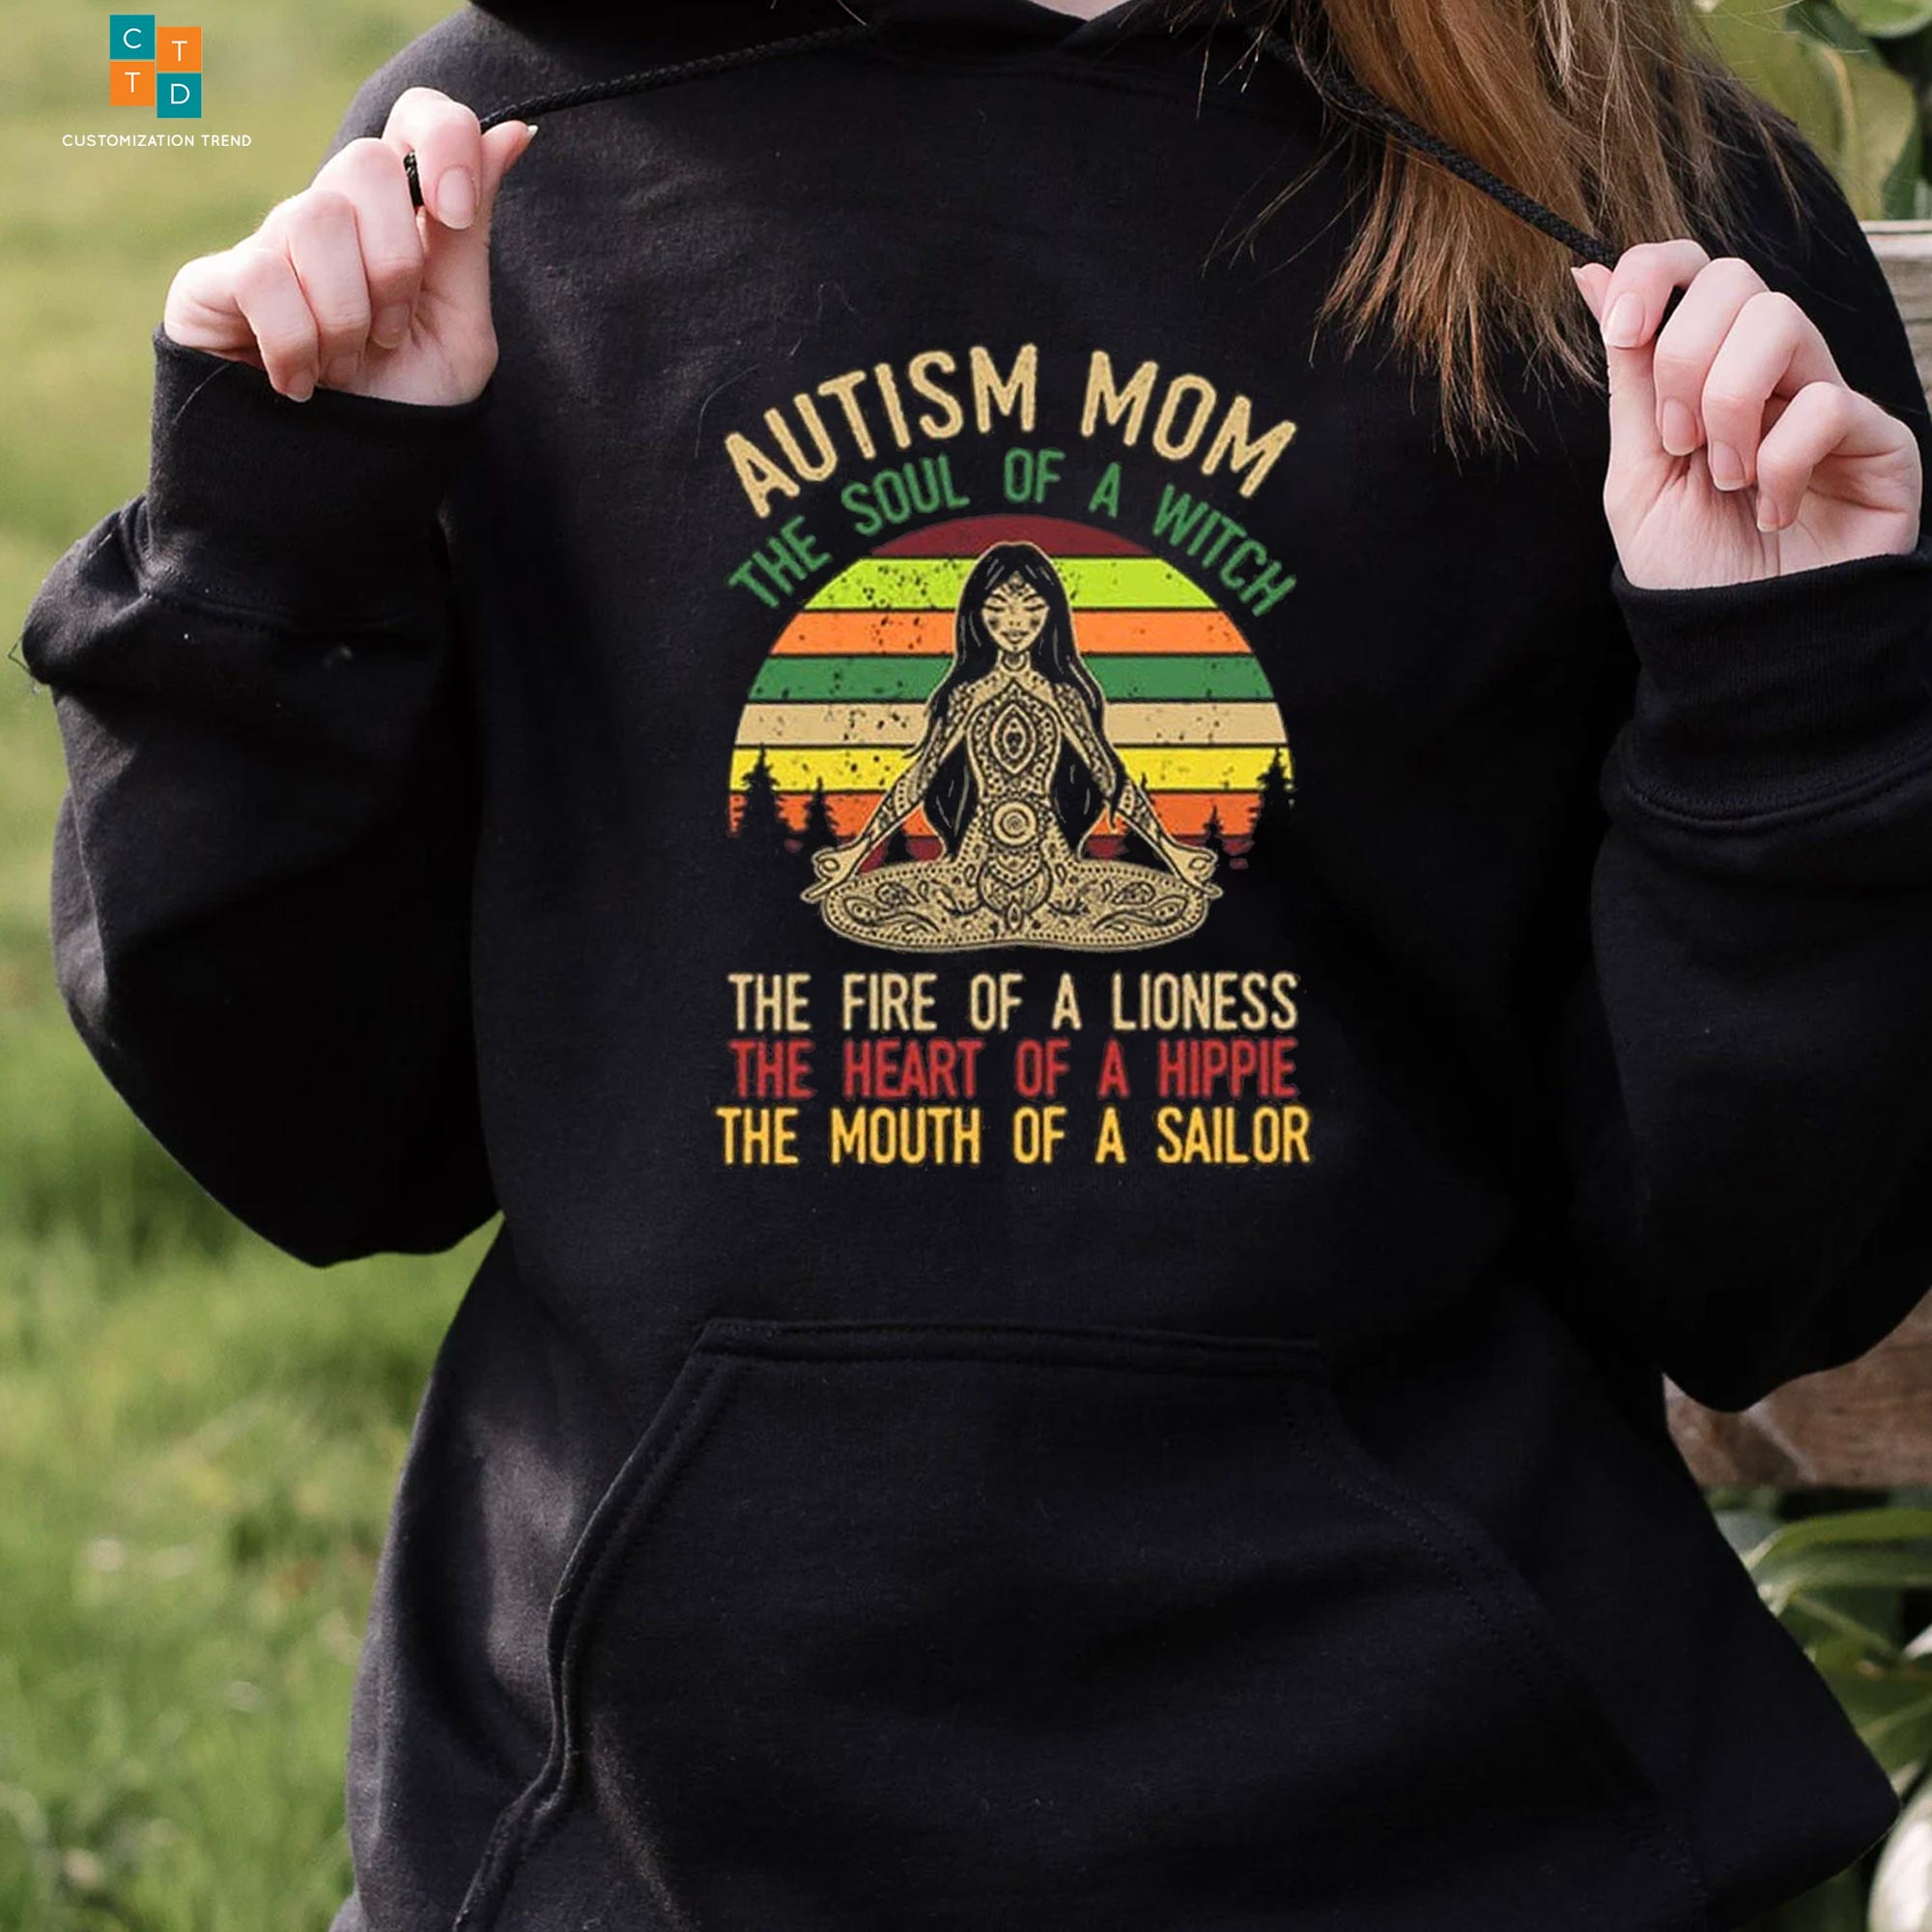 Autism It’s Not A Disability It’s A Different Ability Autism Awareness Hoodie, Shirt